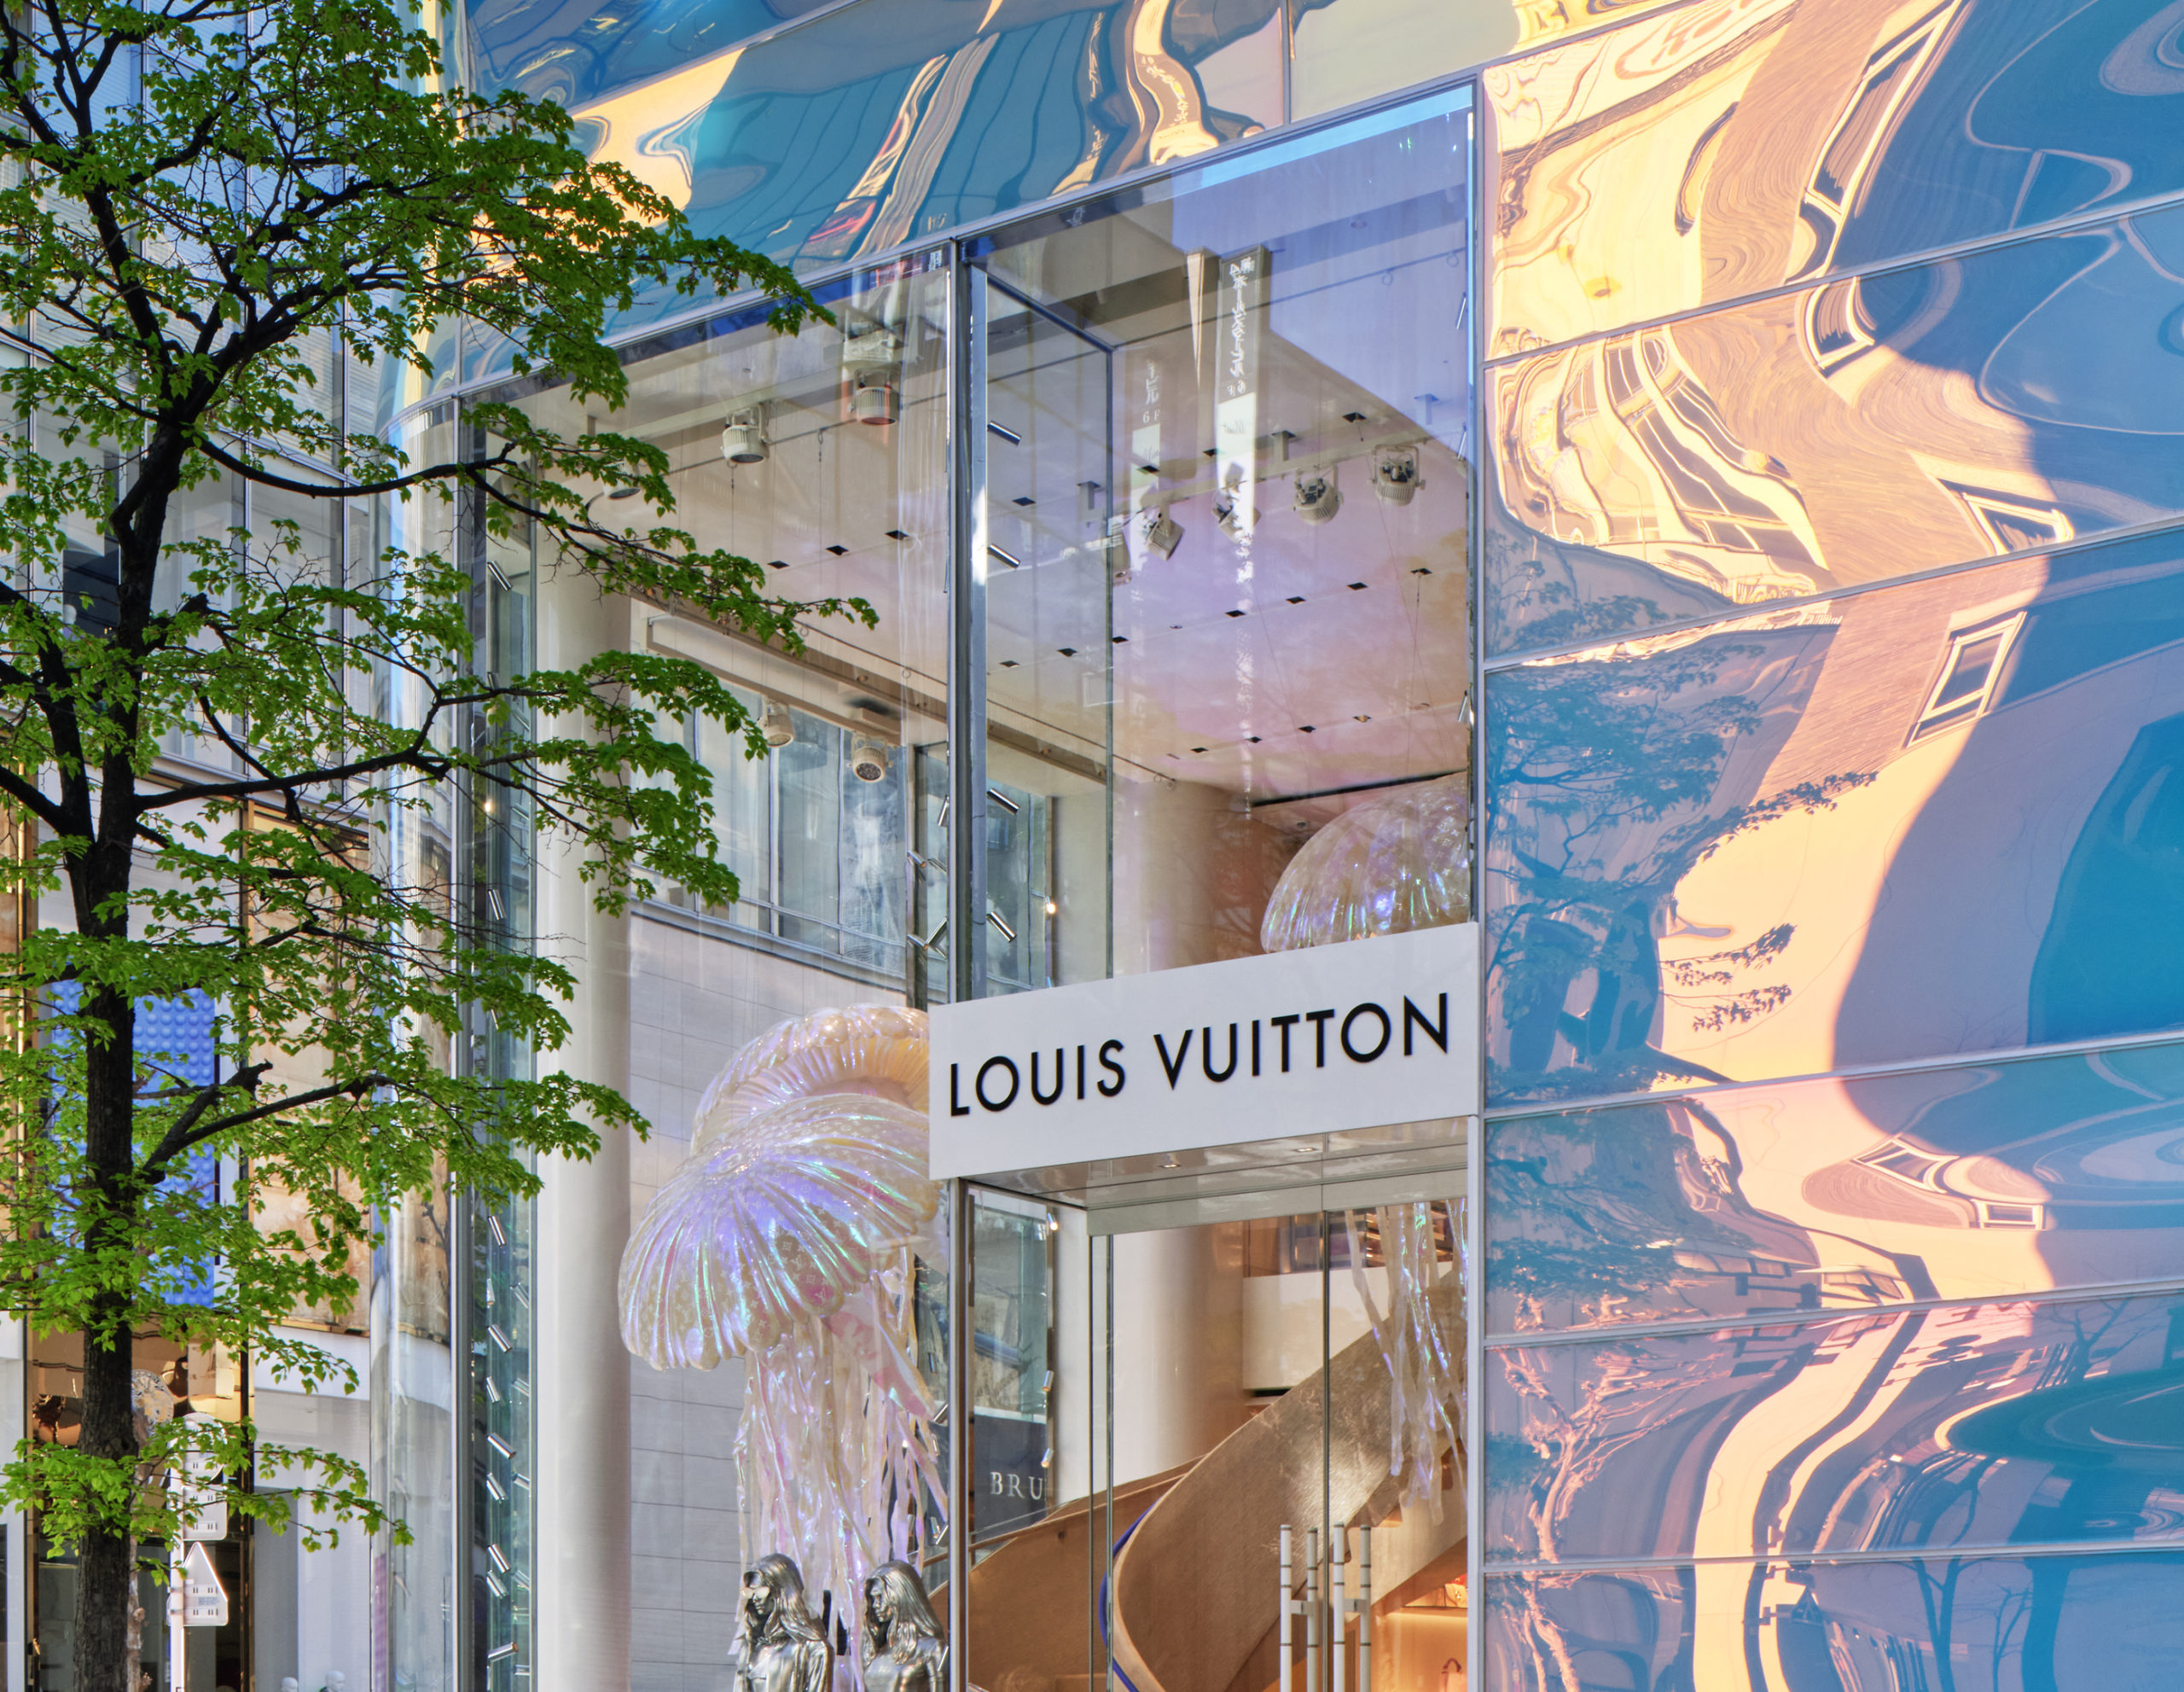 Louis Vuitton's new restaurant and flagship store opens tomorrow